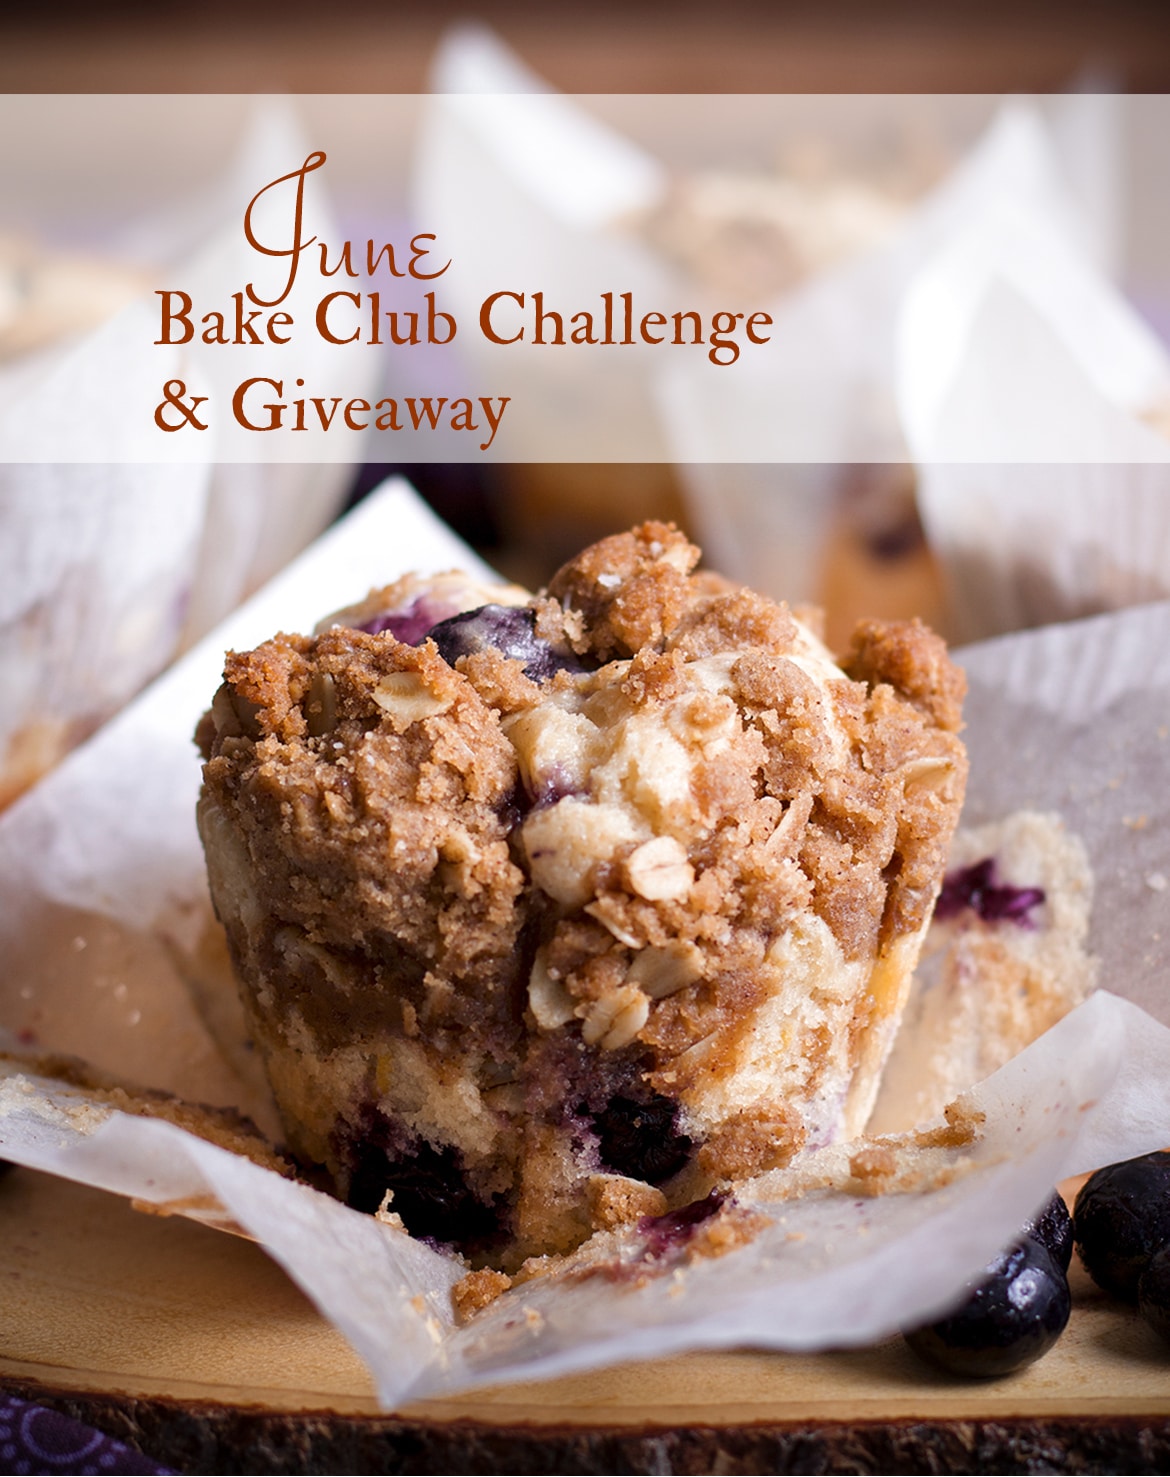 The June Bake Club challenge is Blueberry Muffins.